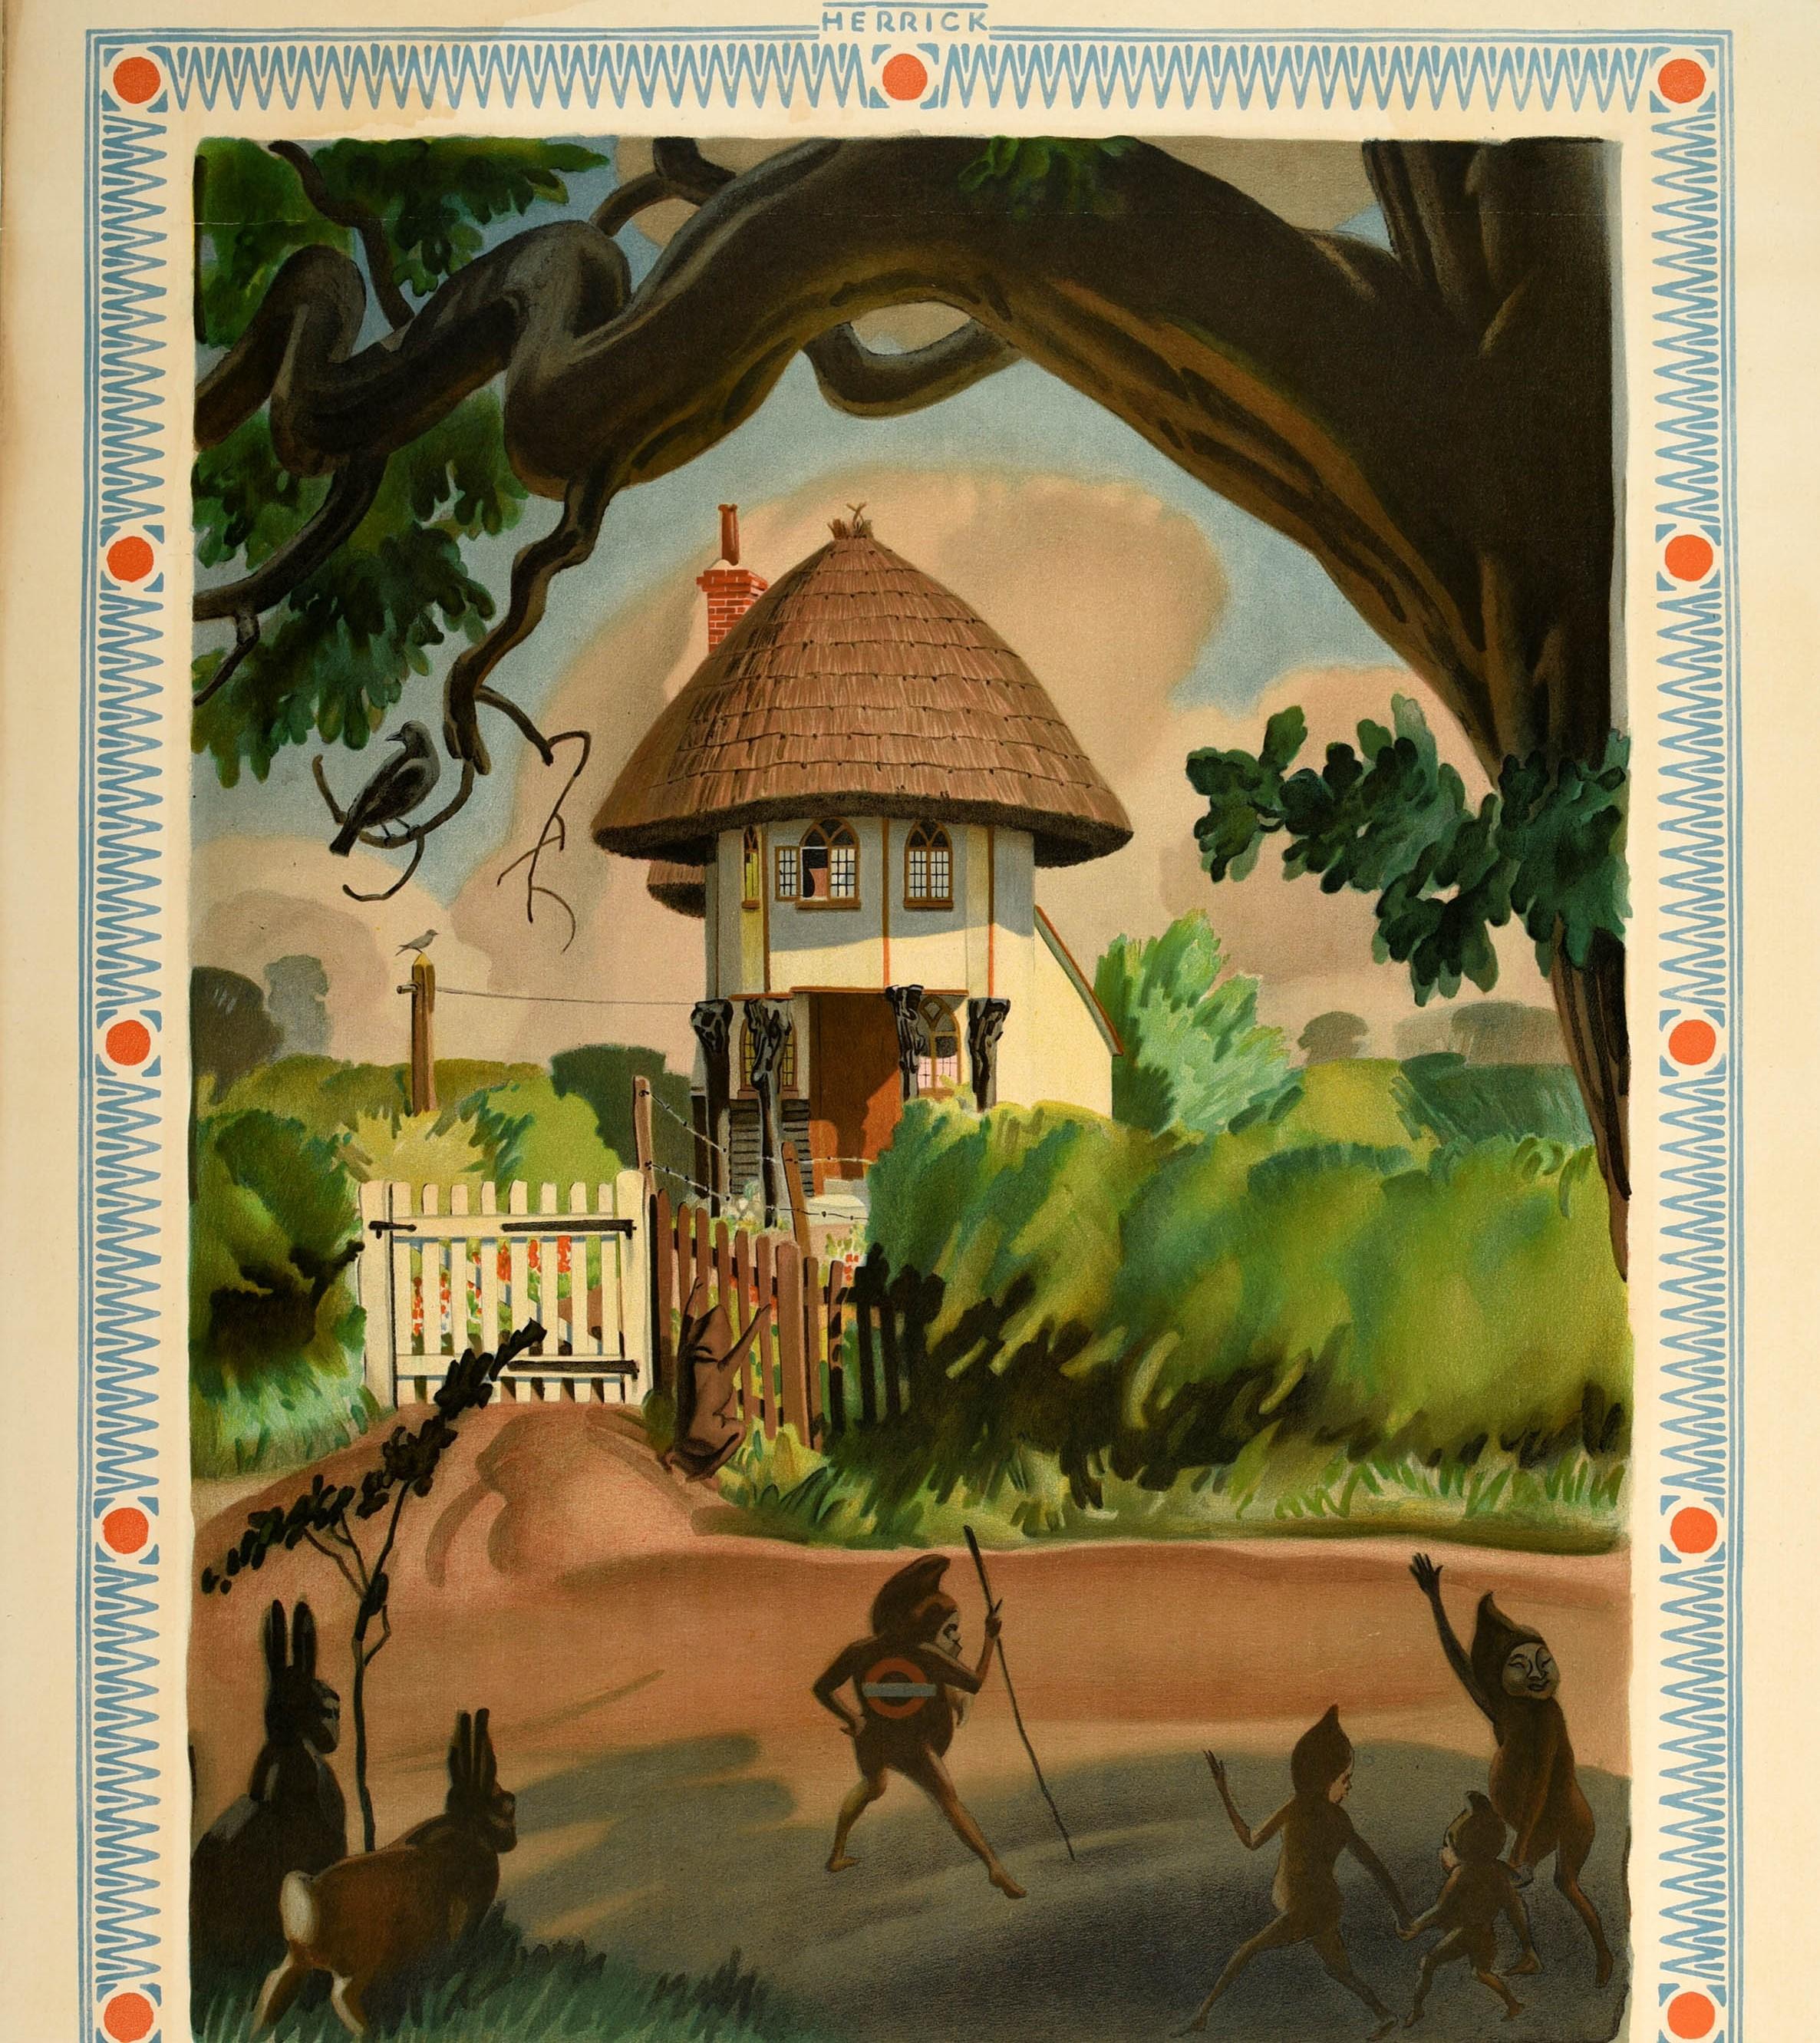 Original vintage London Transport travel poster for Crutch House Latton Harlow in Essex featuring artwork by Frederick Charles Herrick (1887-1970) showing two rabbits watching a group of mythical pixies in the foreground, the lead pixie holding a